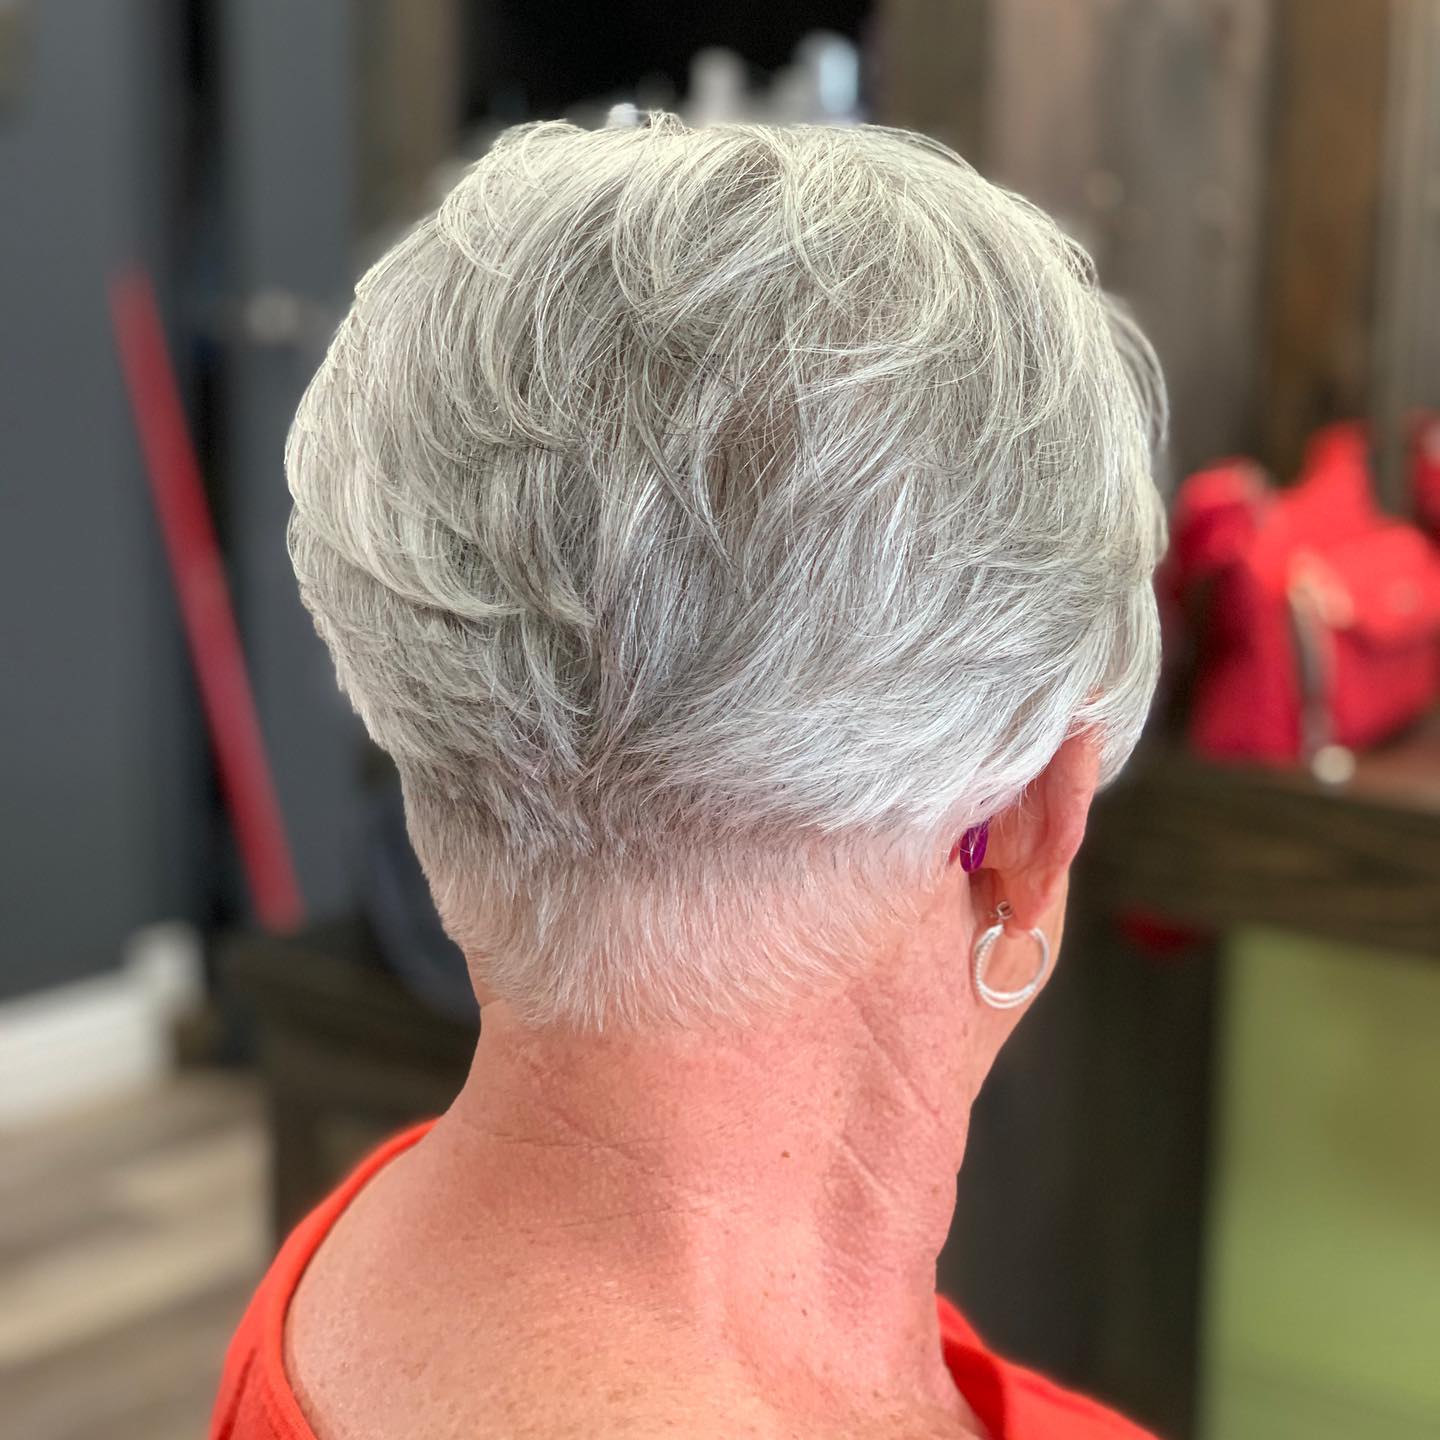 Hairstyles for Women Over 70 8 Hairstyles for over 70 with fine hair | Hairstyles for over 70 with glasses | Medium length hairstyles for women over 70 Hairstyles for Women over 70